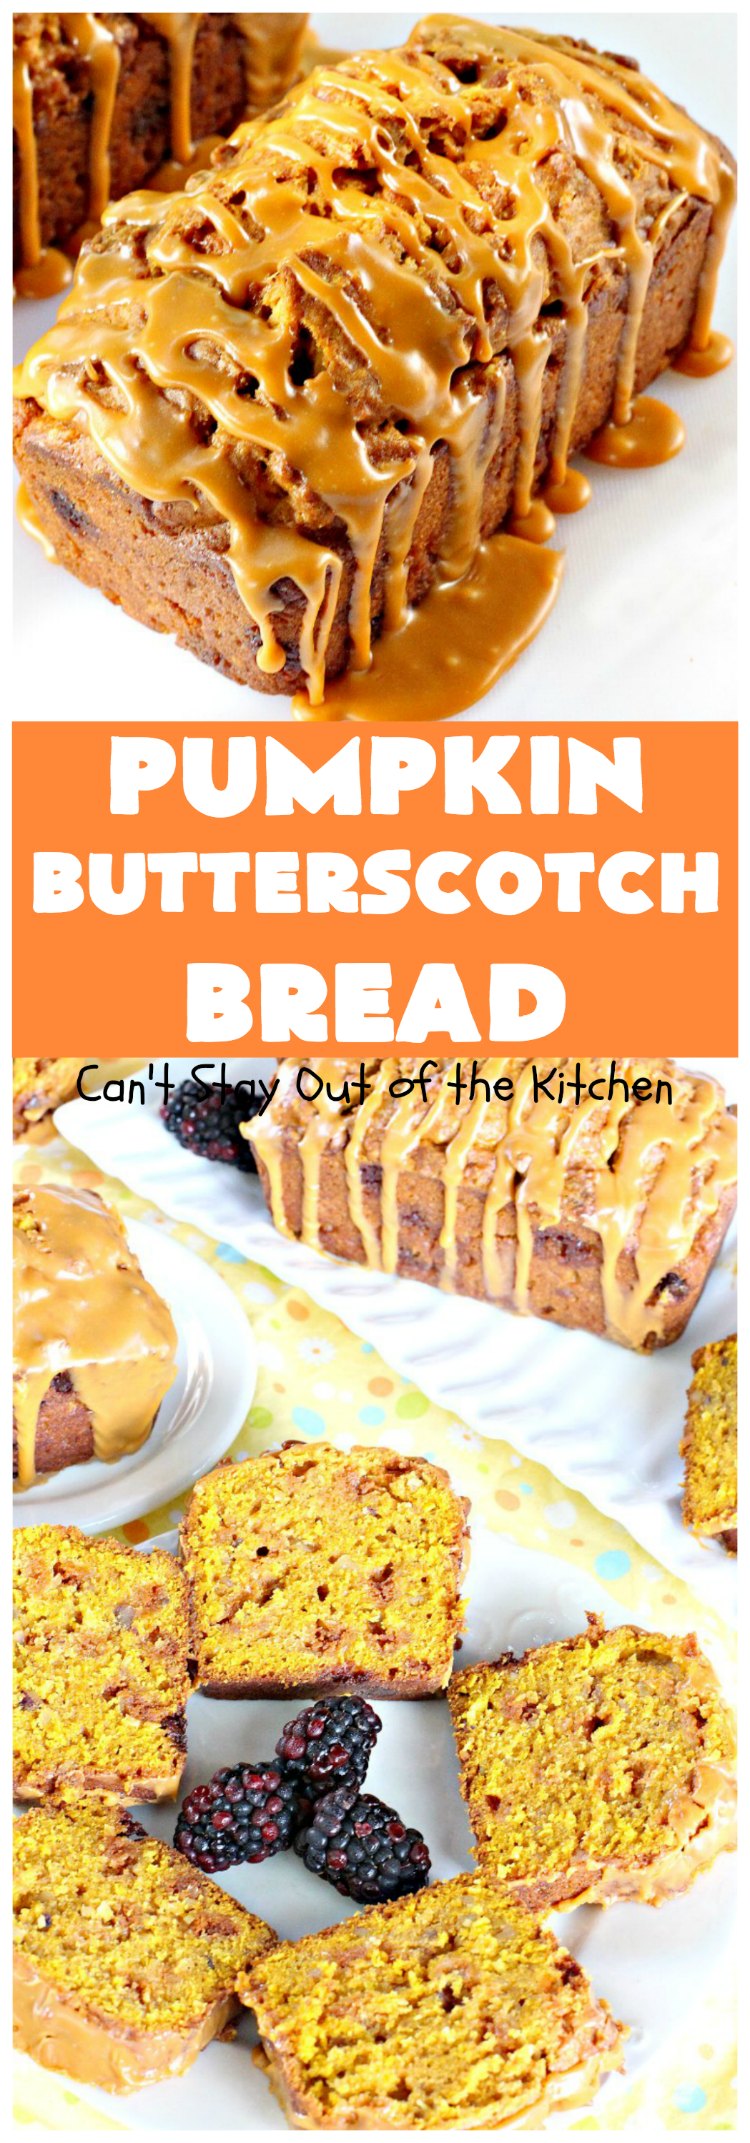 Pumpkin Butterscotch Bread | Can't Stay Out of the Kitchen